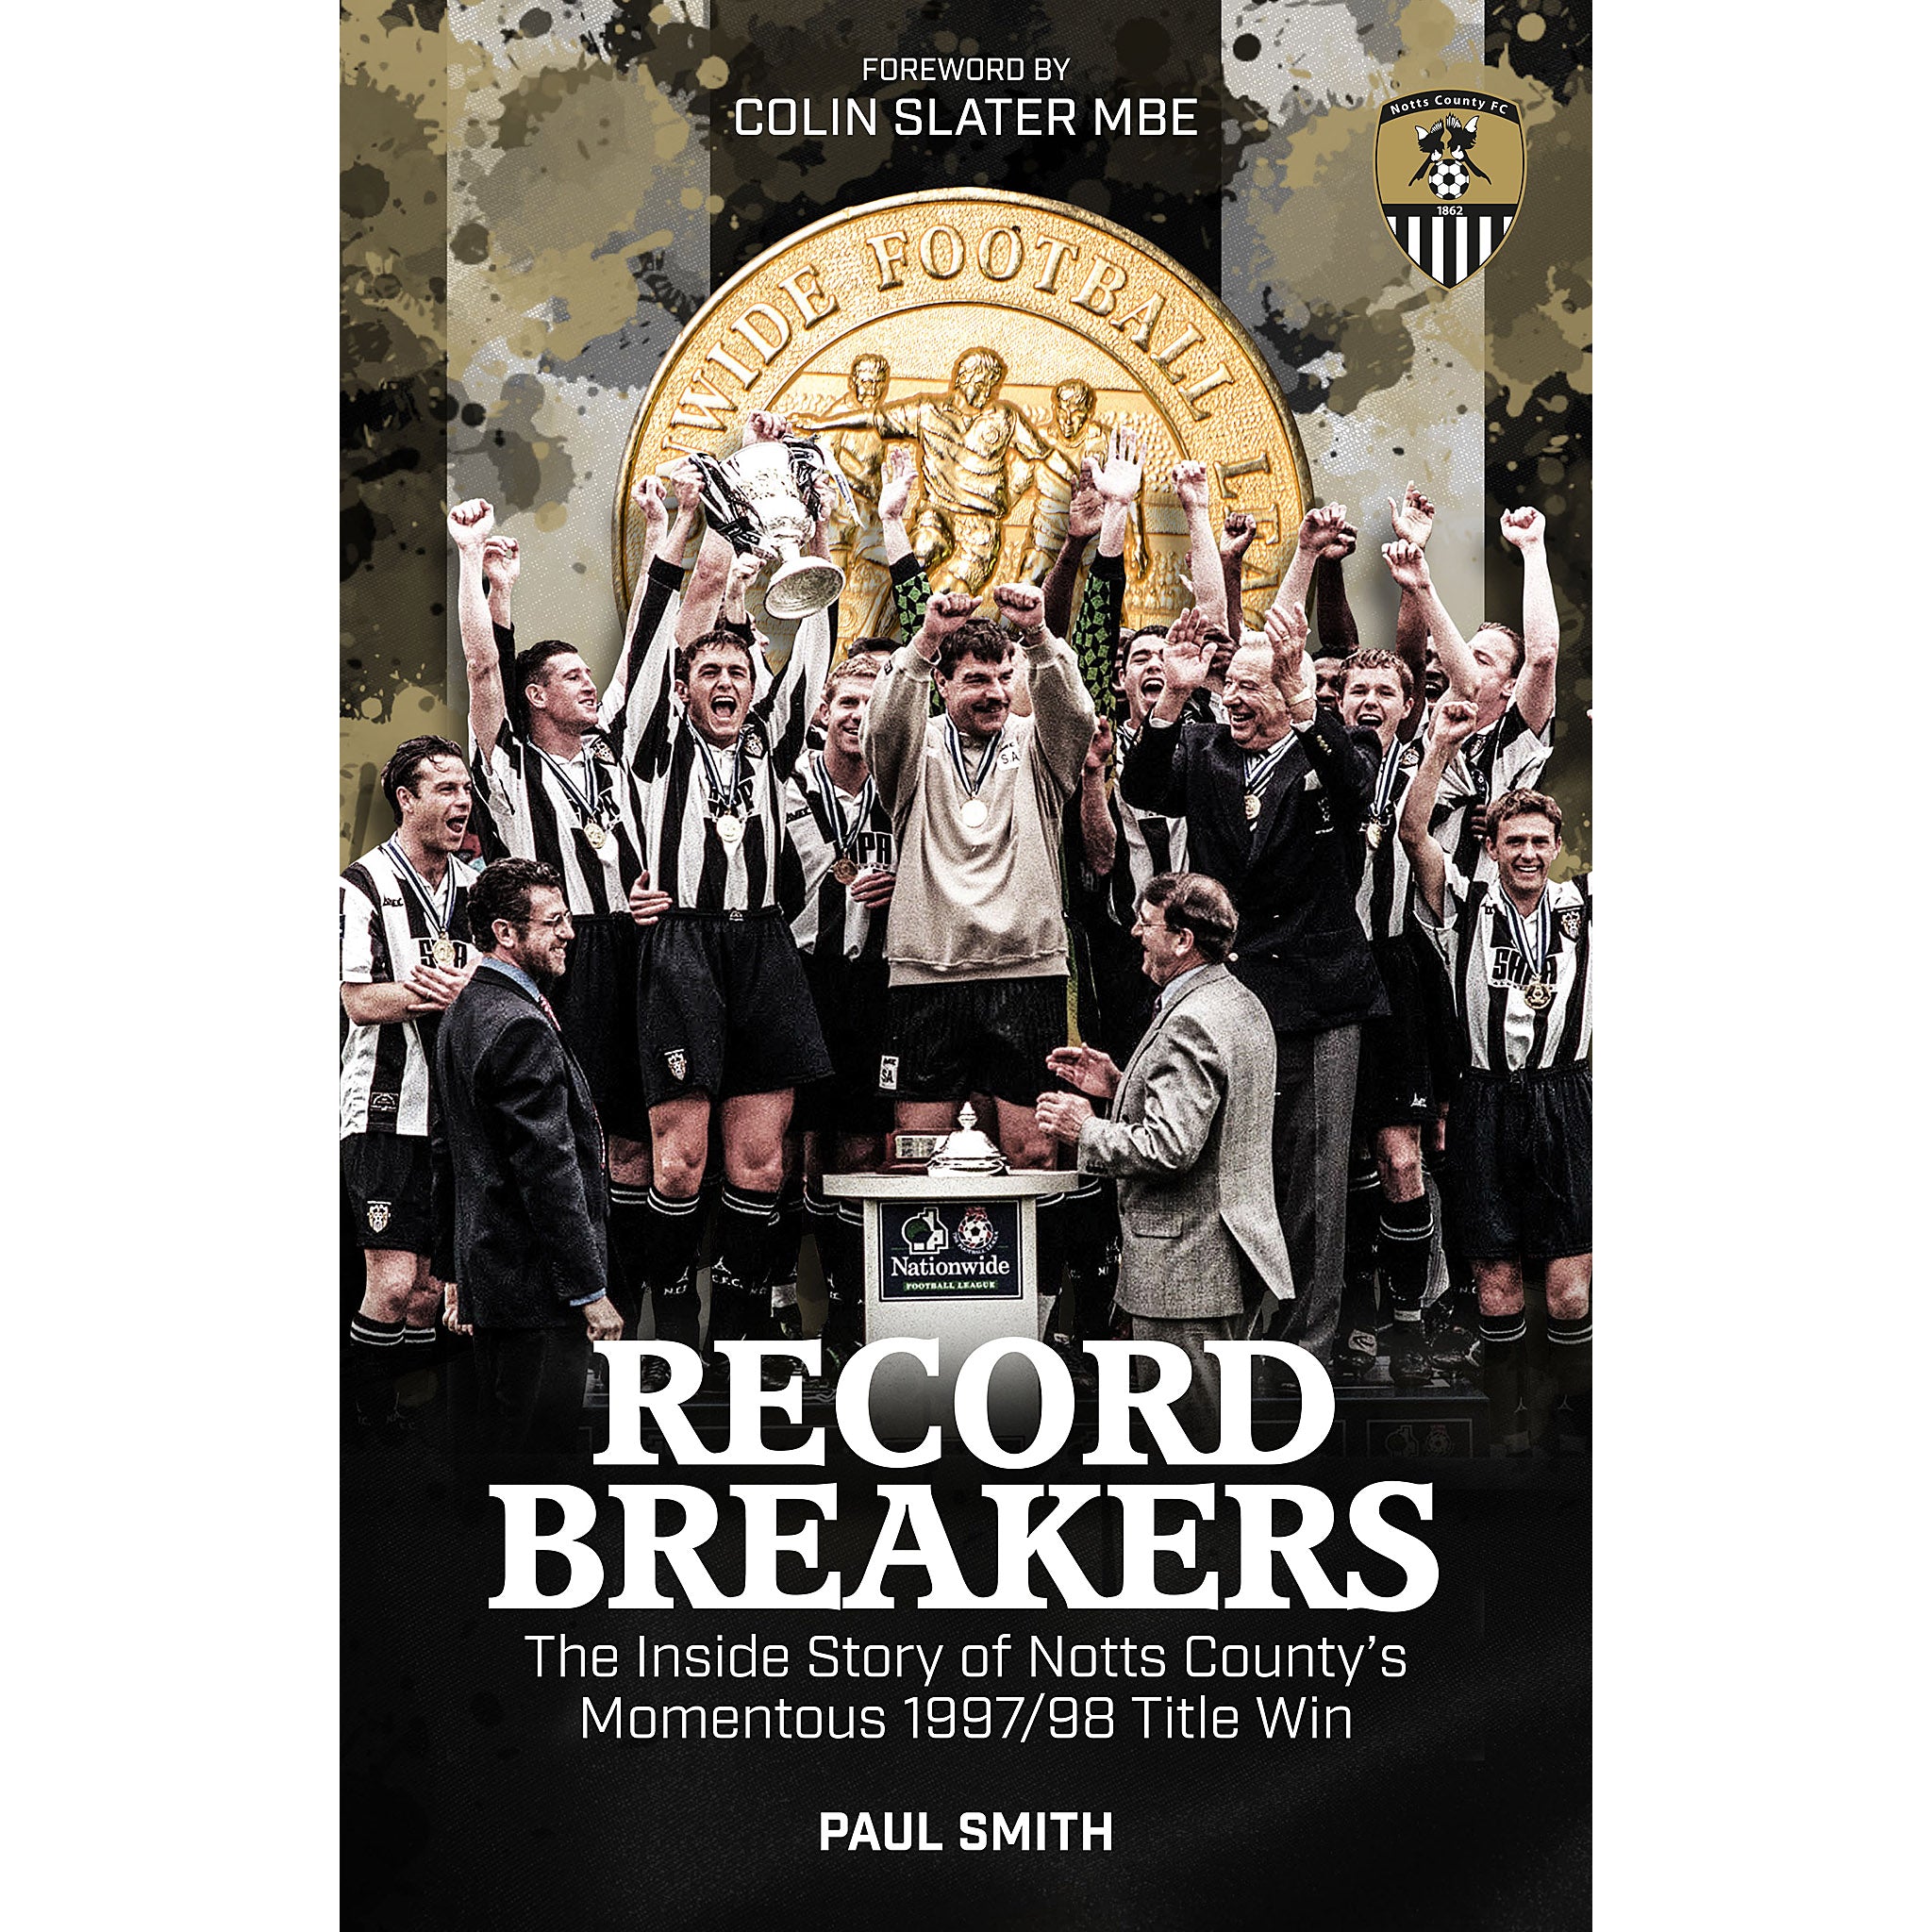 Record Breakers – The Inside Story of Notts County's Momentous 1997/98 Title Win